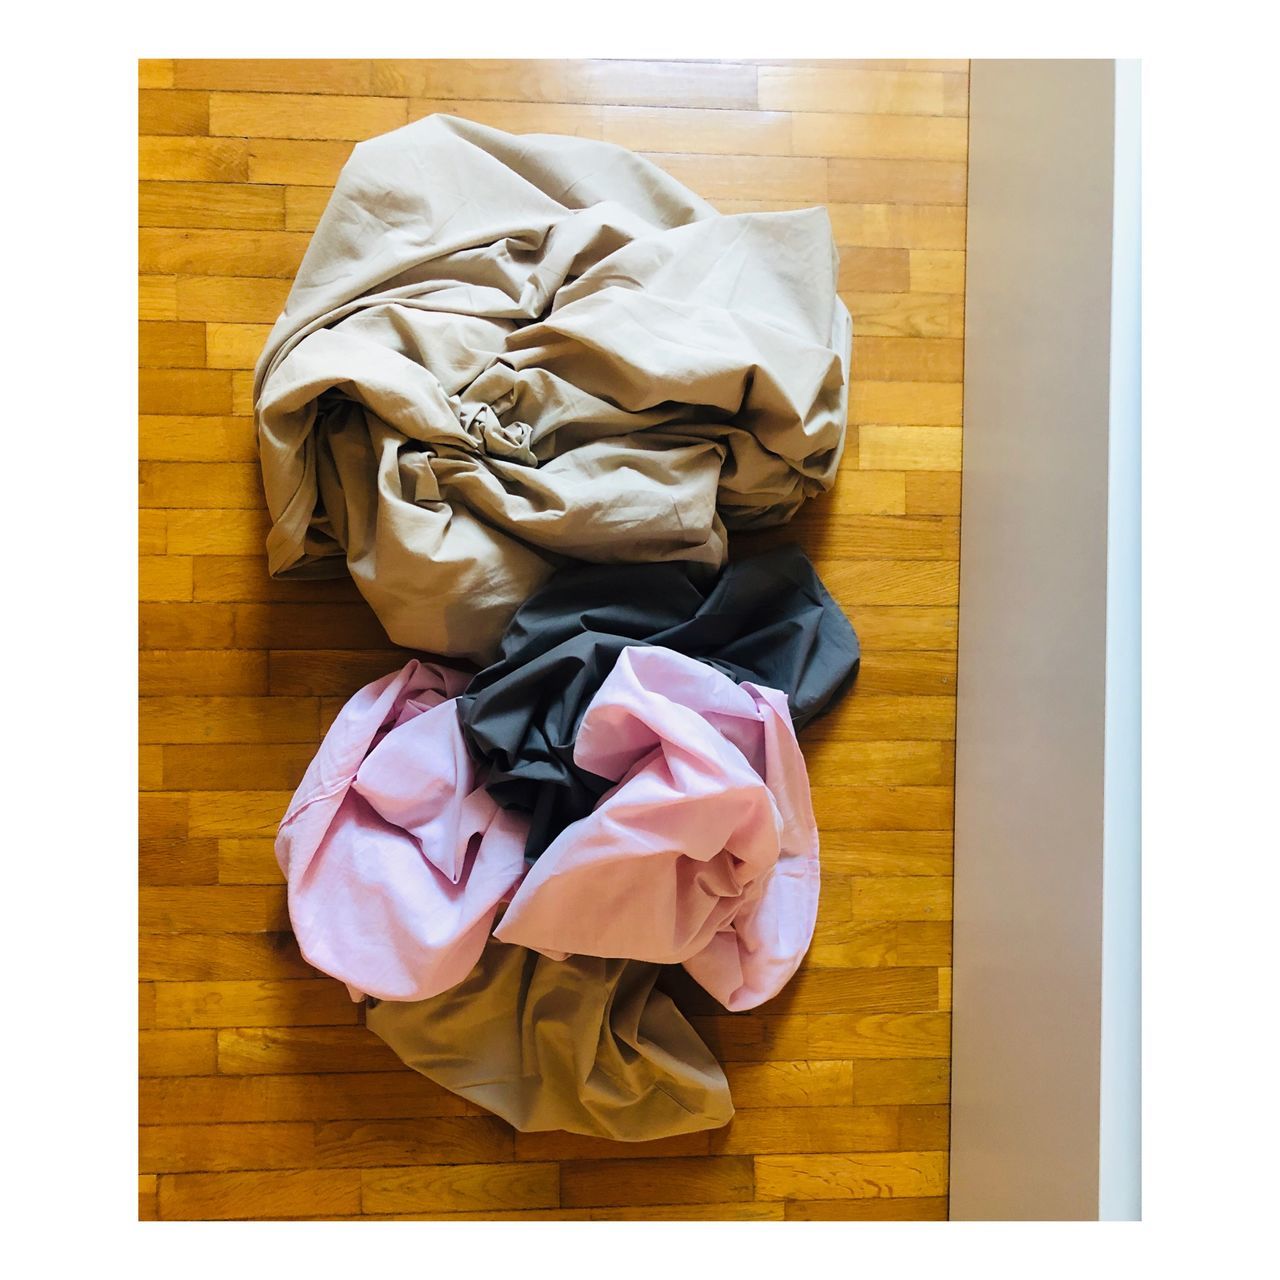 indoors, transfer print, no people, high angle view, auto post production filter, directly above, still life, clothing, wood - material, wood, hardwood floor, table, messy, furniture, flooring, bag, crumpled, close-up, container, medium group of objects